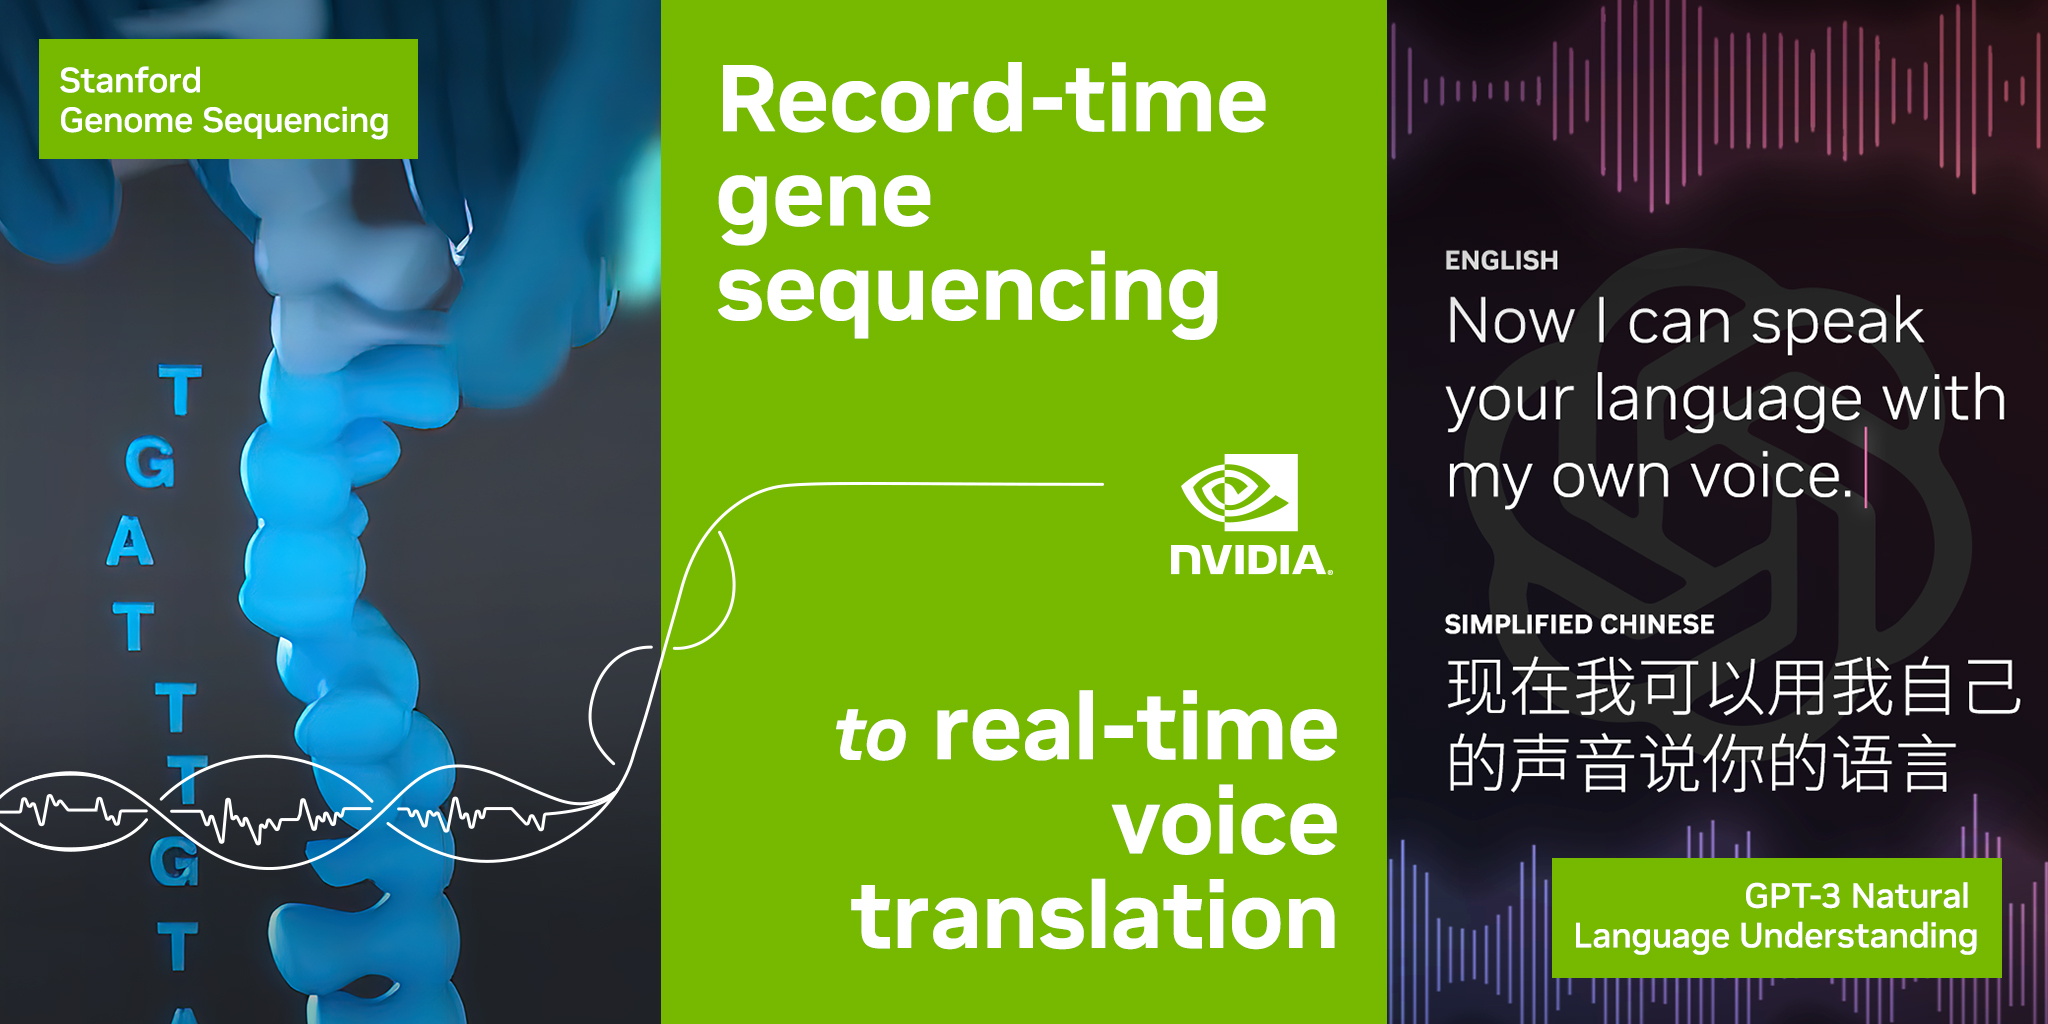 NVIDIA on Twitter: ".@Stanford researchers and NVIDIA collaborators beat the Guinness World Record time to the entire human genome. And our advances voice translation are breaking down barriers for communication